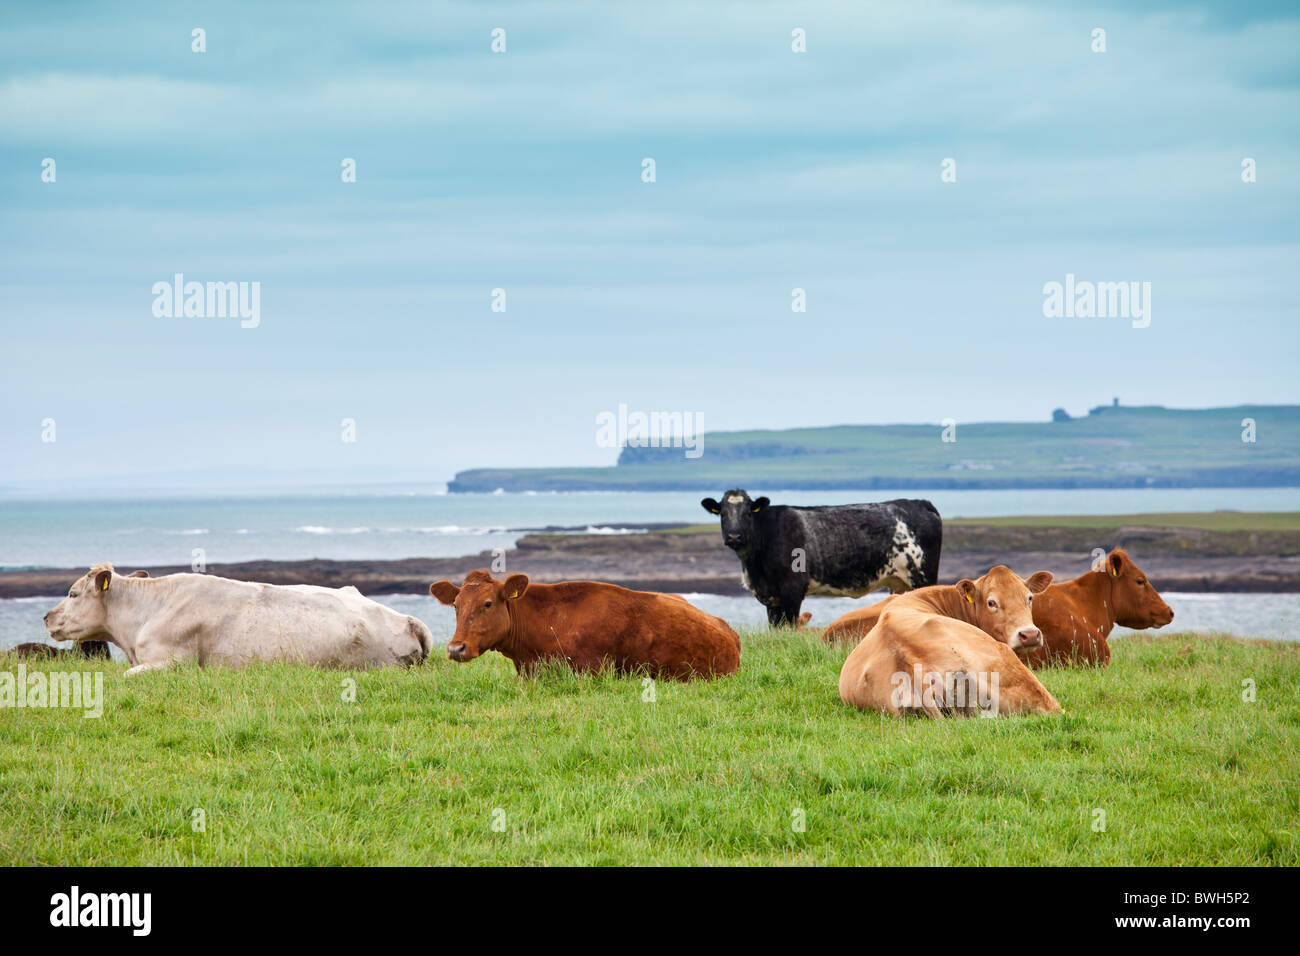 Herd of cattle by the coast in County Clare, Ireland Stock Photo